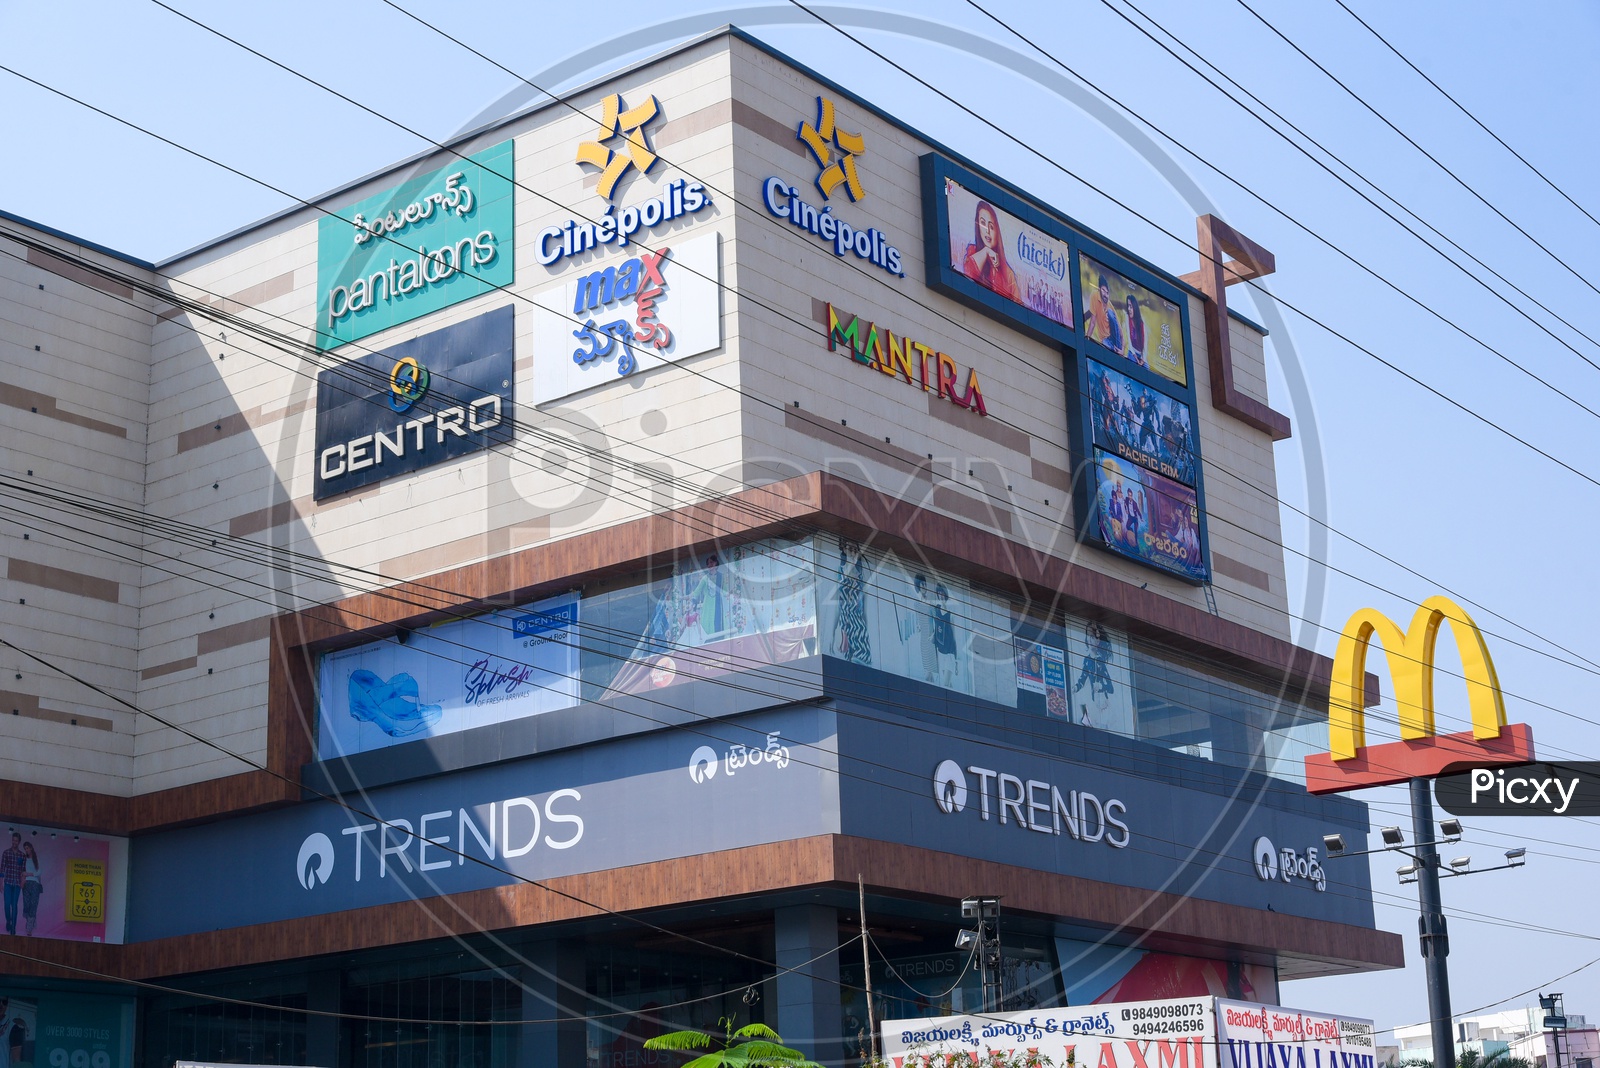 Cinepolis and Mantra Mall